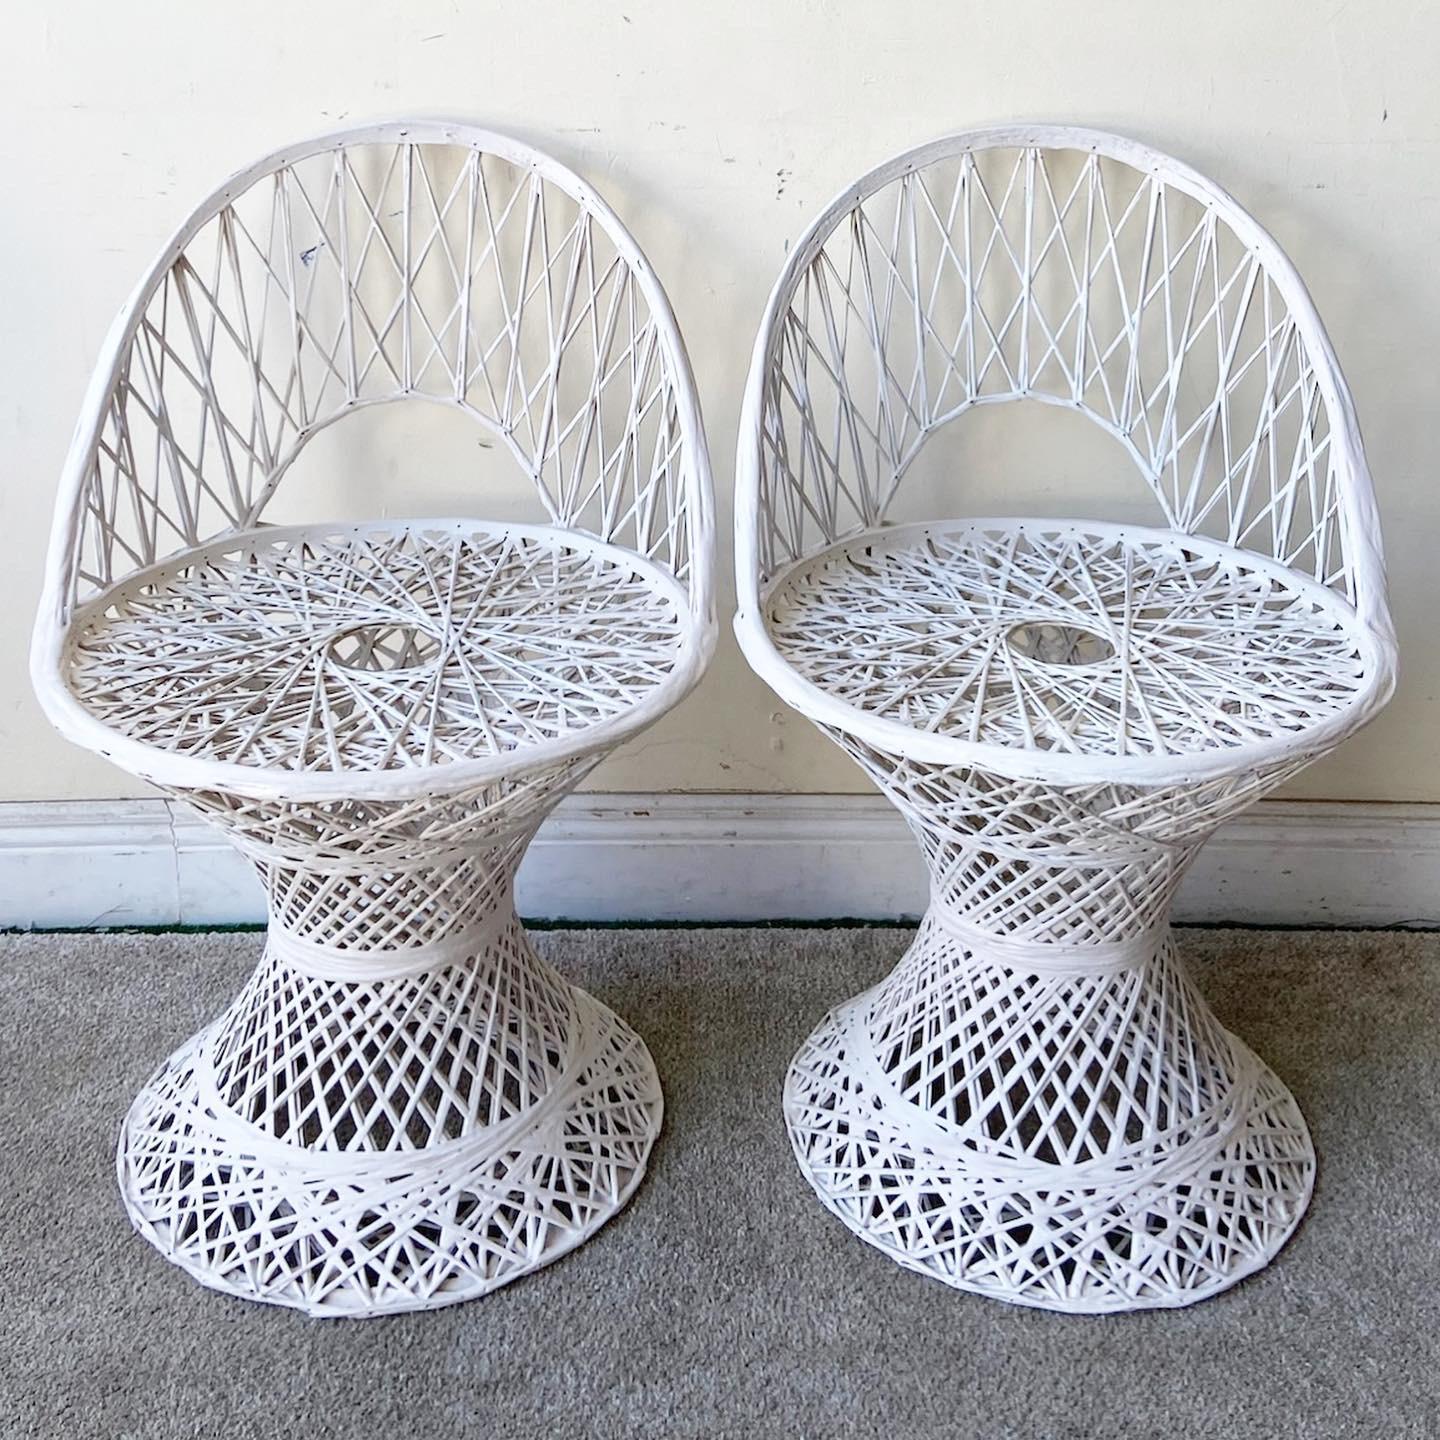 Exceptional set of 4 Mid-Century Modern spun fiberglass chairs. Each feature an arched backrest and fabulous woven design.
   